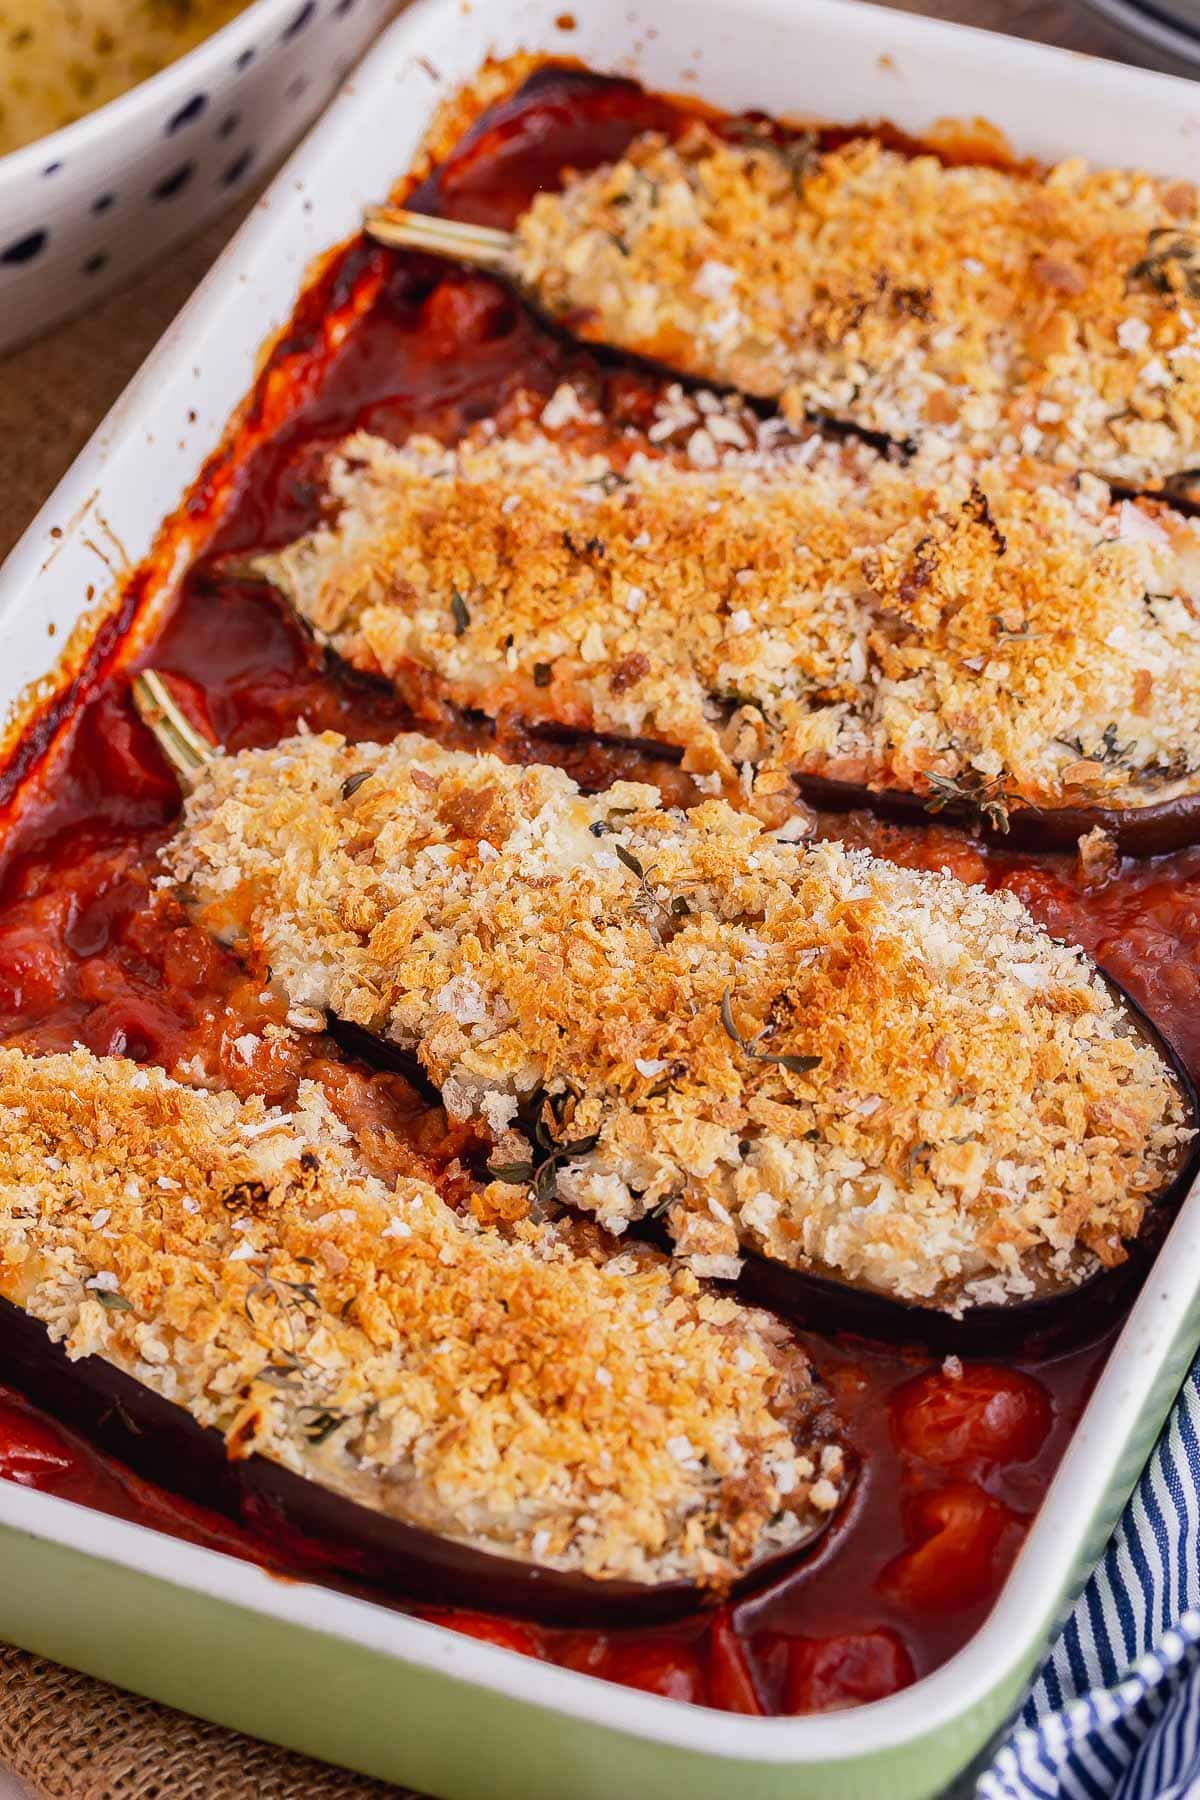 Breadcrumb topped aubergine in a red sauce